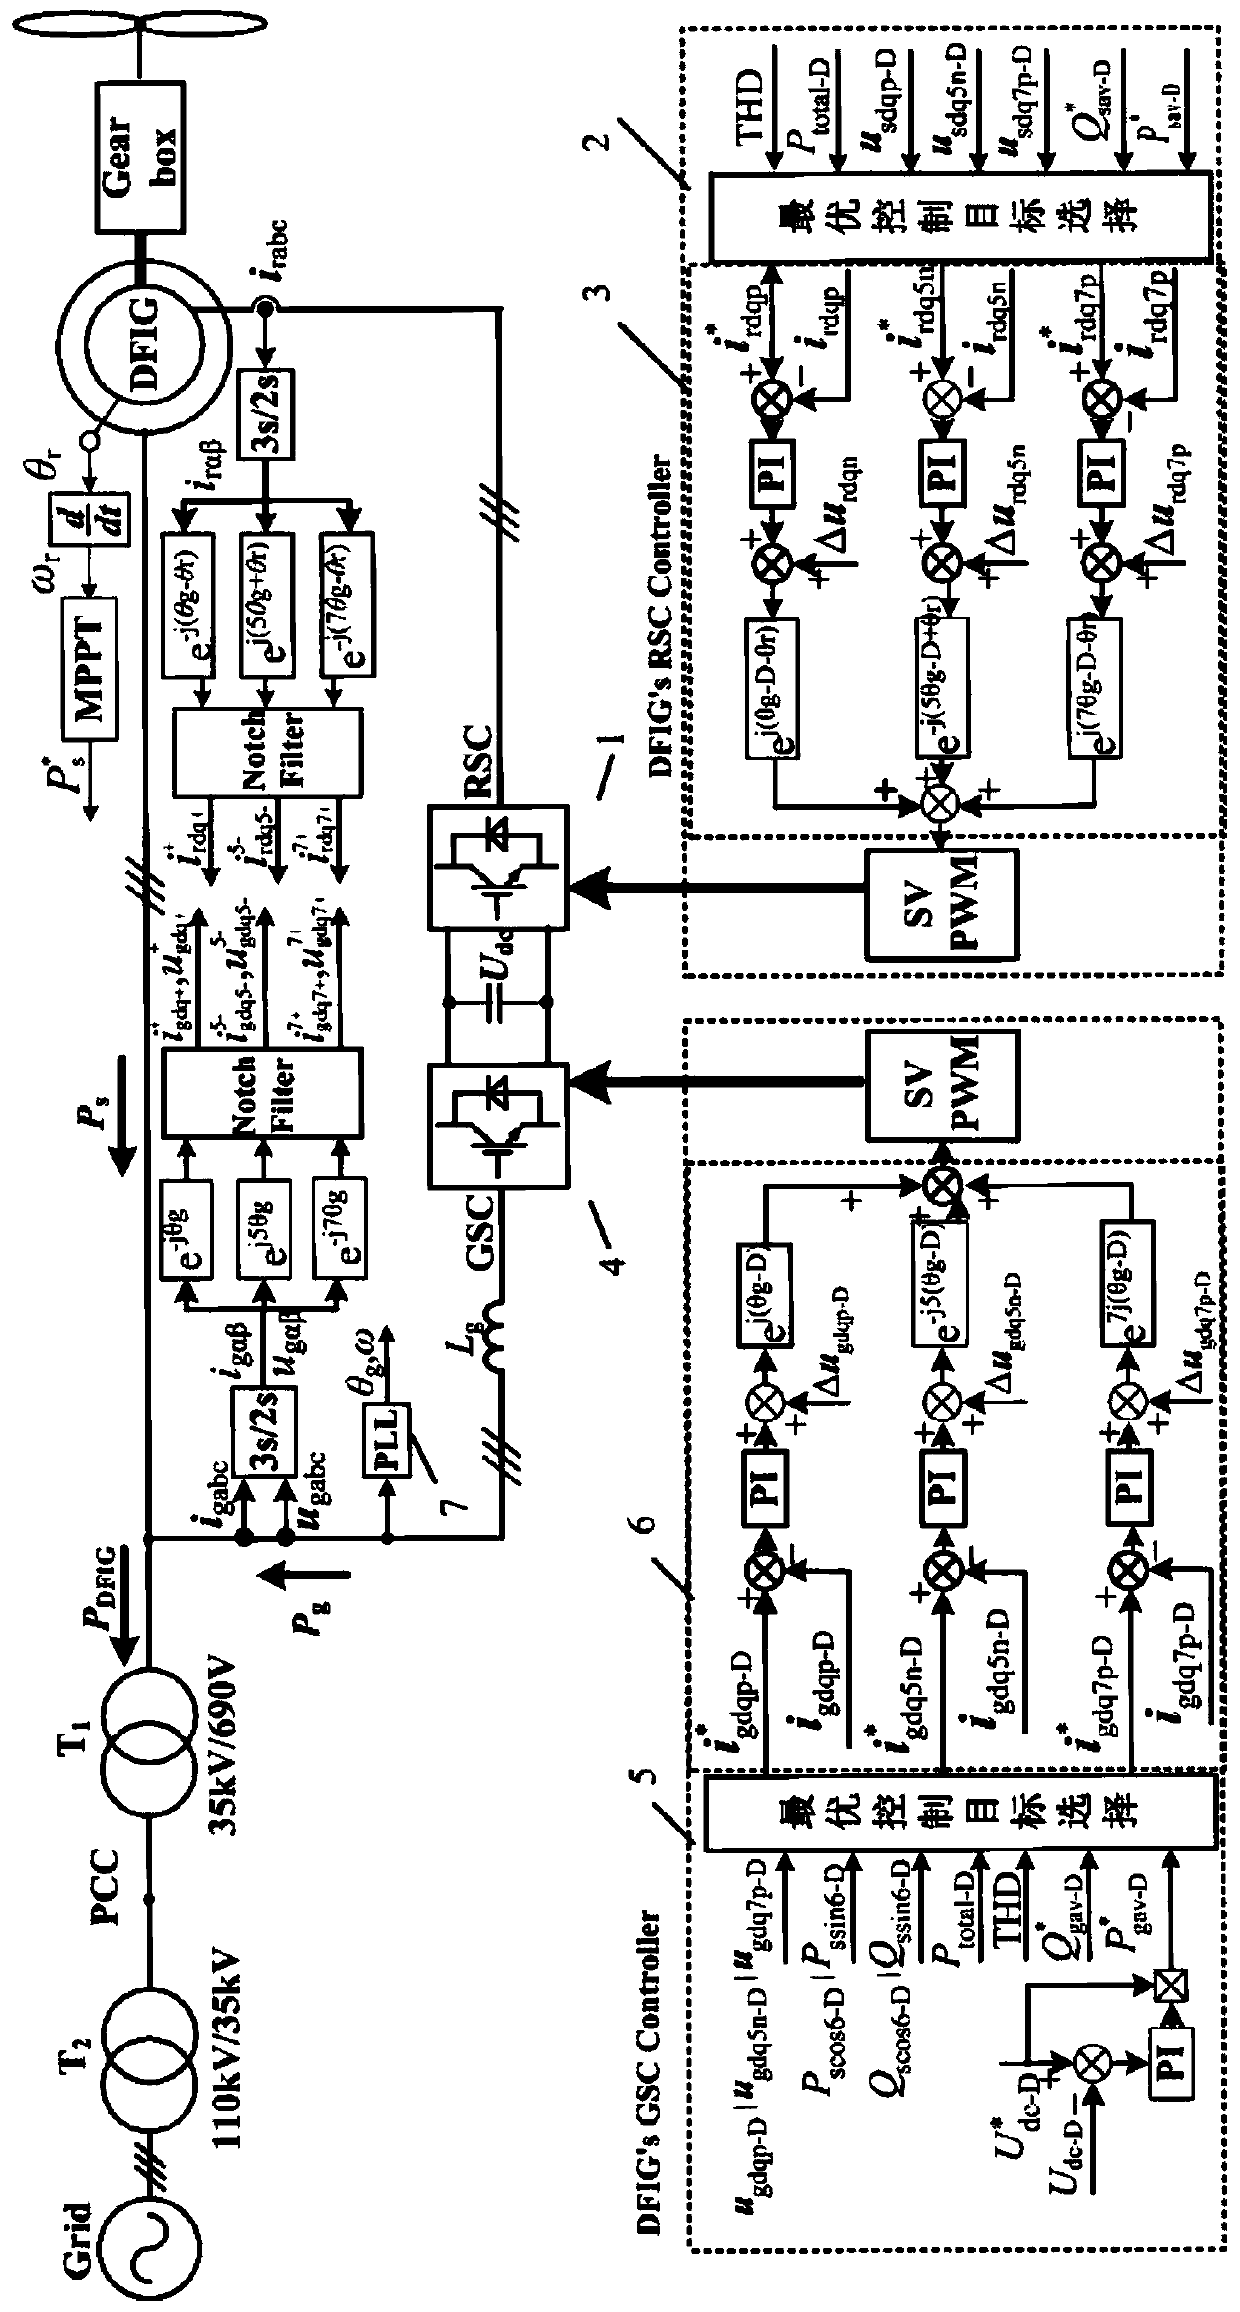 Multi-target cooperative control method for doubly-fed wind power generation system under harmonic power grid voltage